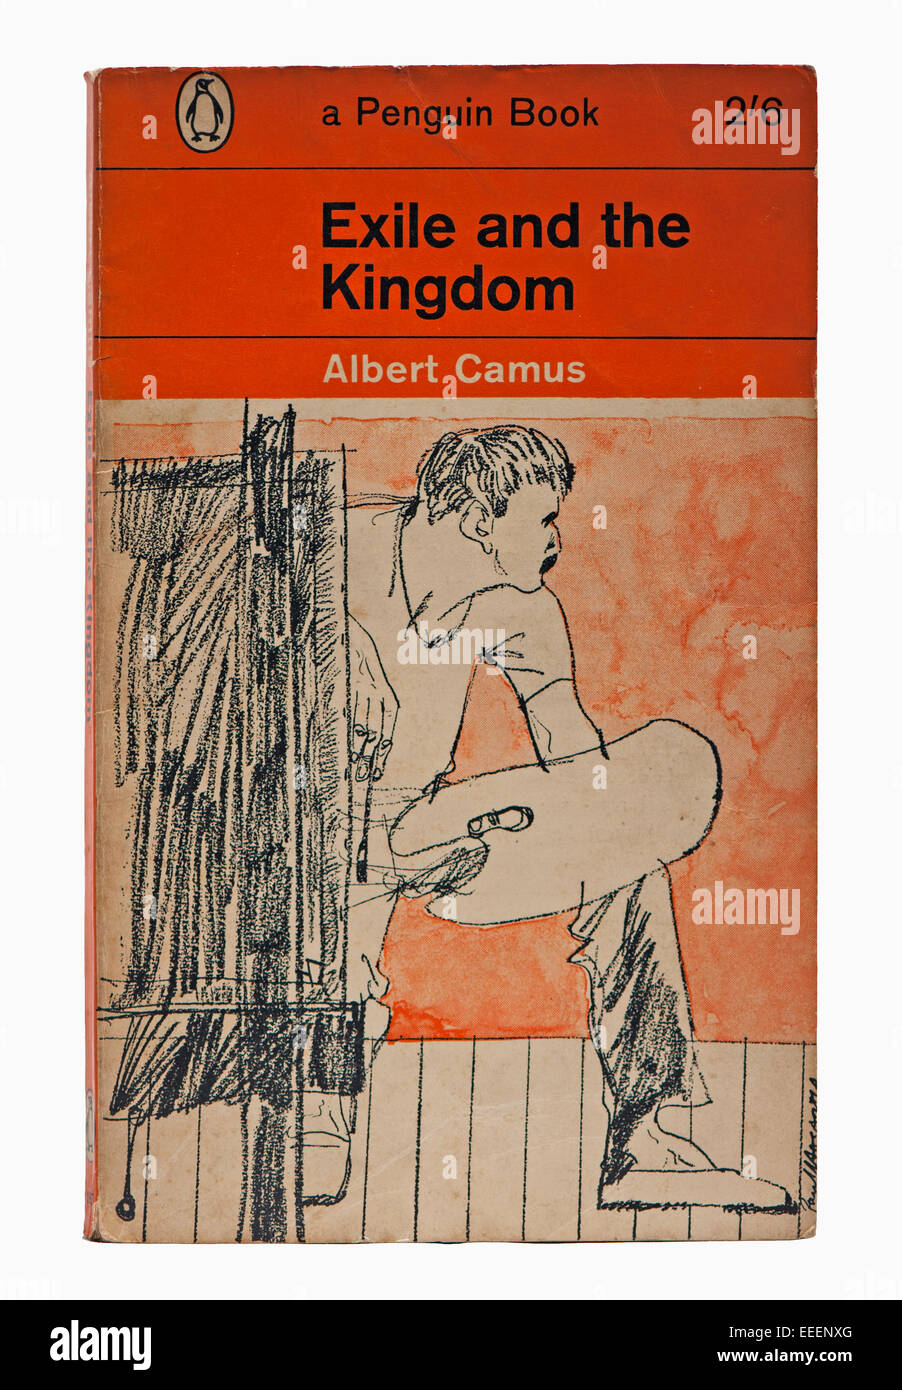 Penguin Classic Exile and the Kingdom by Albert Camus printed in 1962 Stock Photo